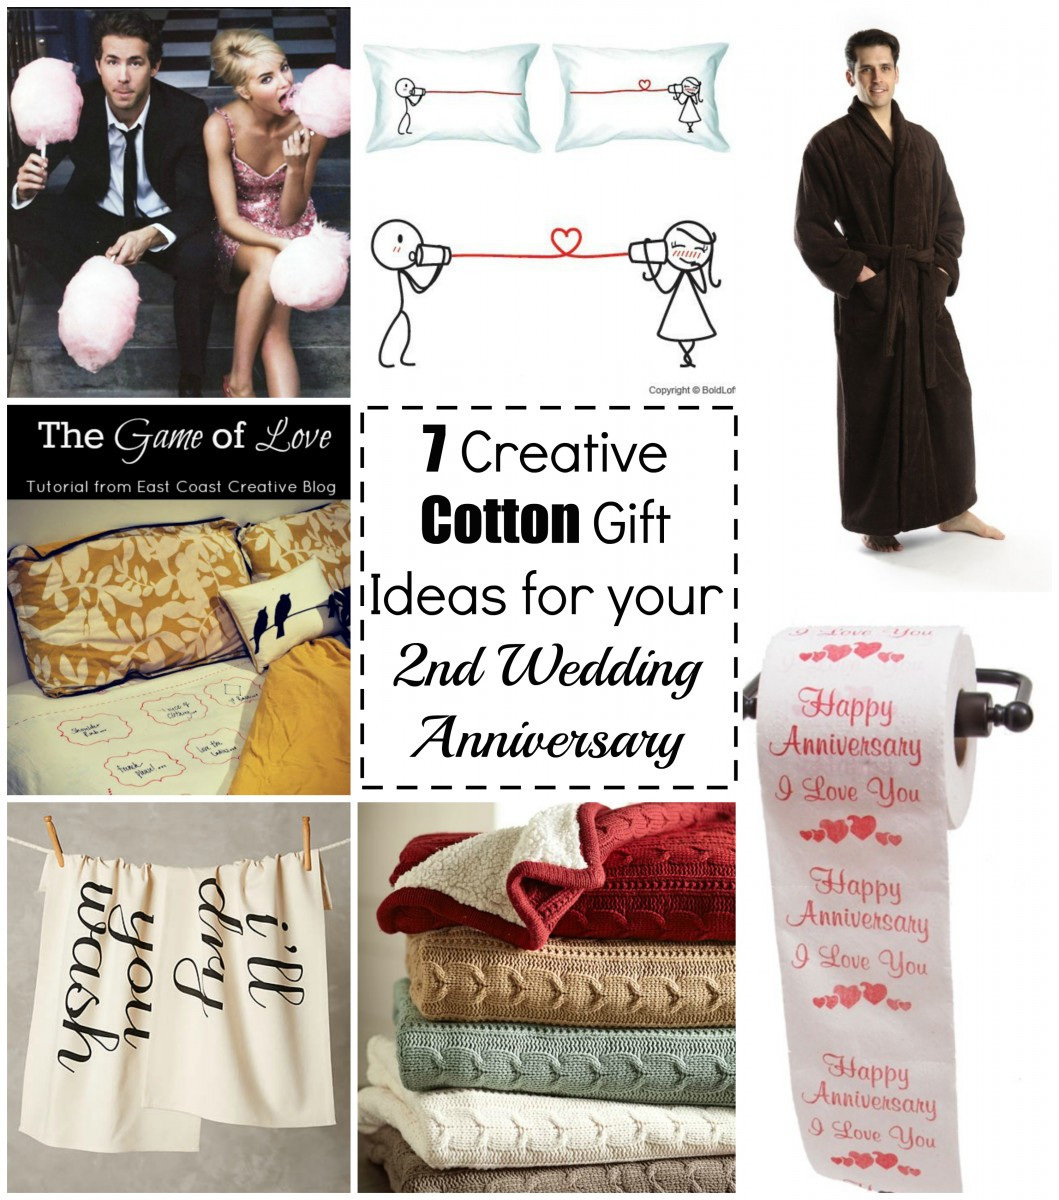 Fun Second Wedding Gift Ideas
 7 Cotton Gift Ideas for your 2nd Wedding Anniversary